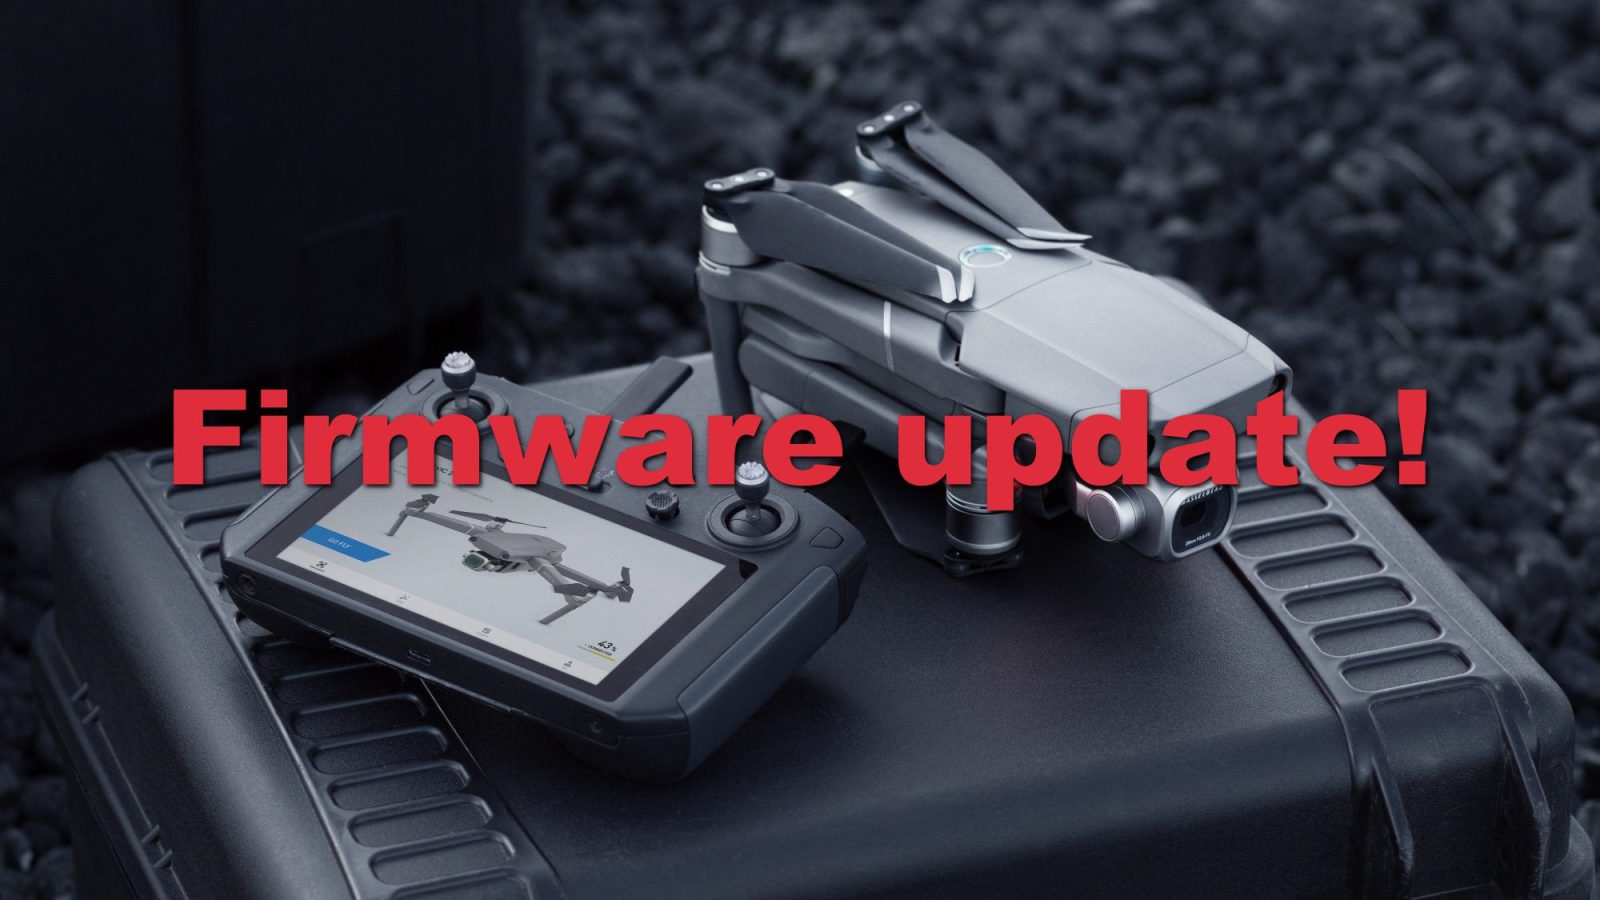 Newly introduced but out of stock DJI Smart Controller gets firmware update